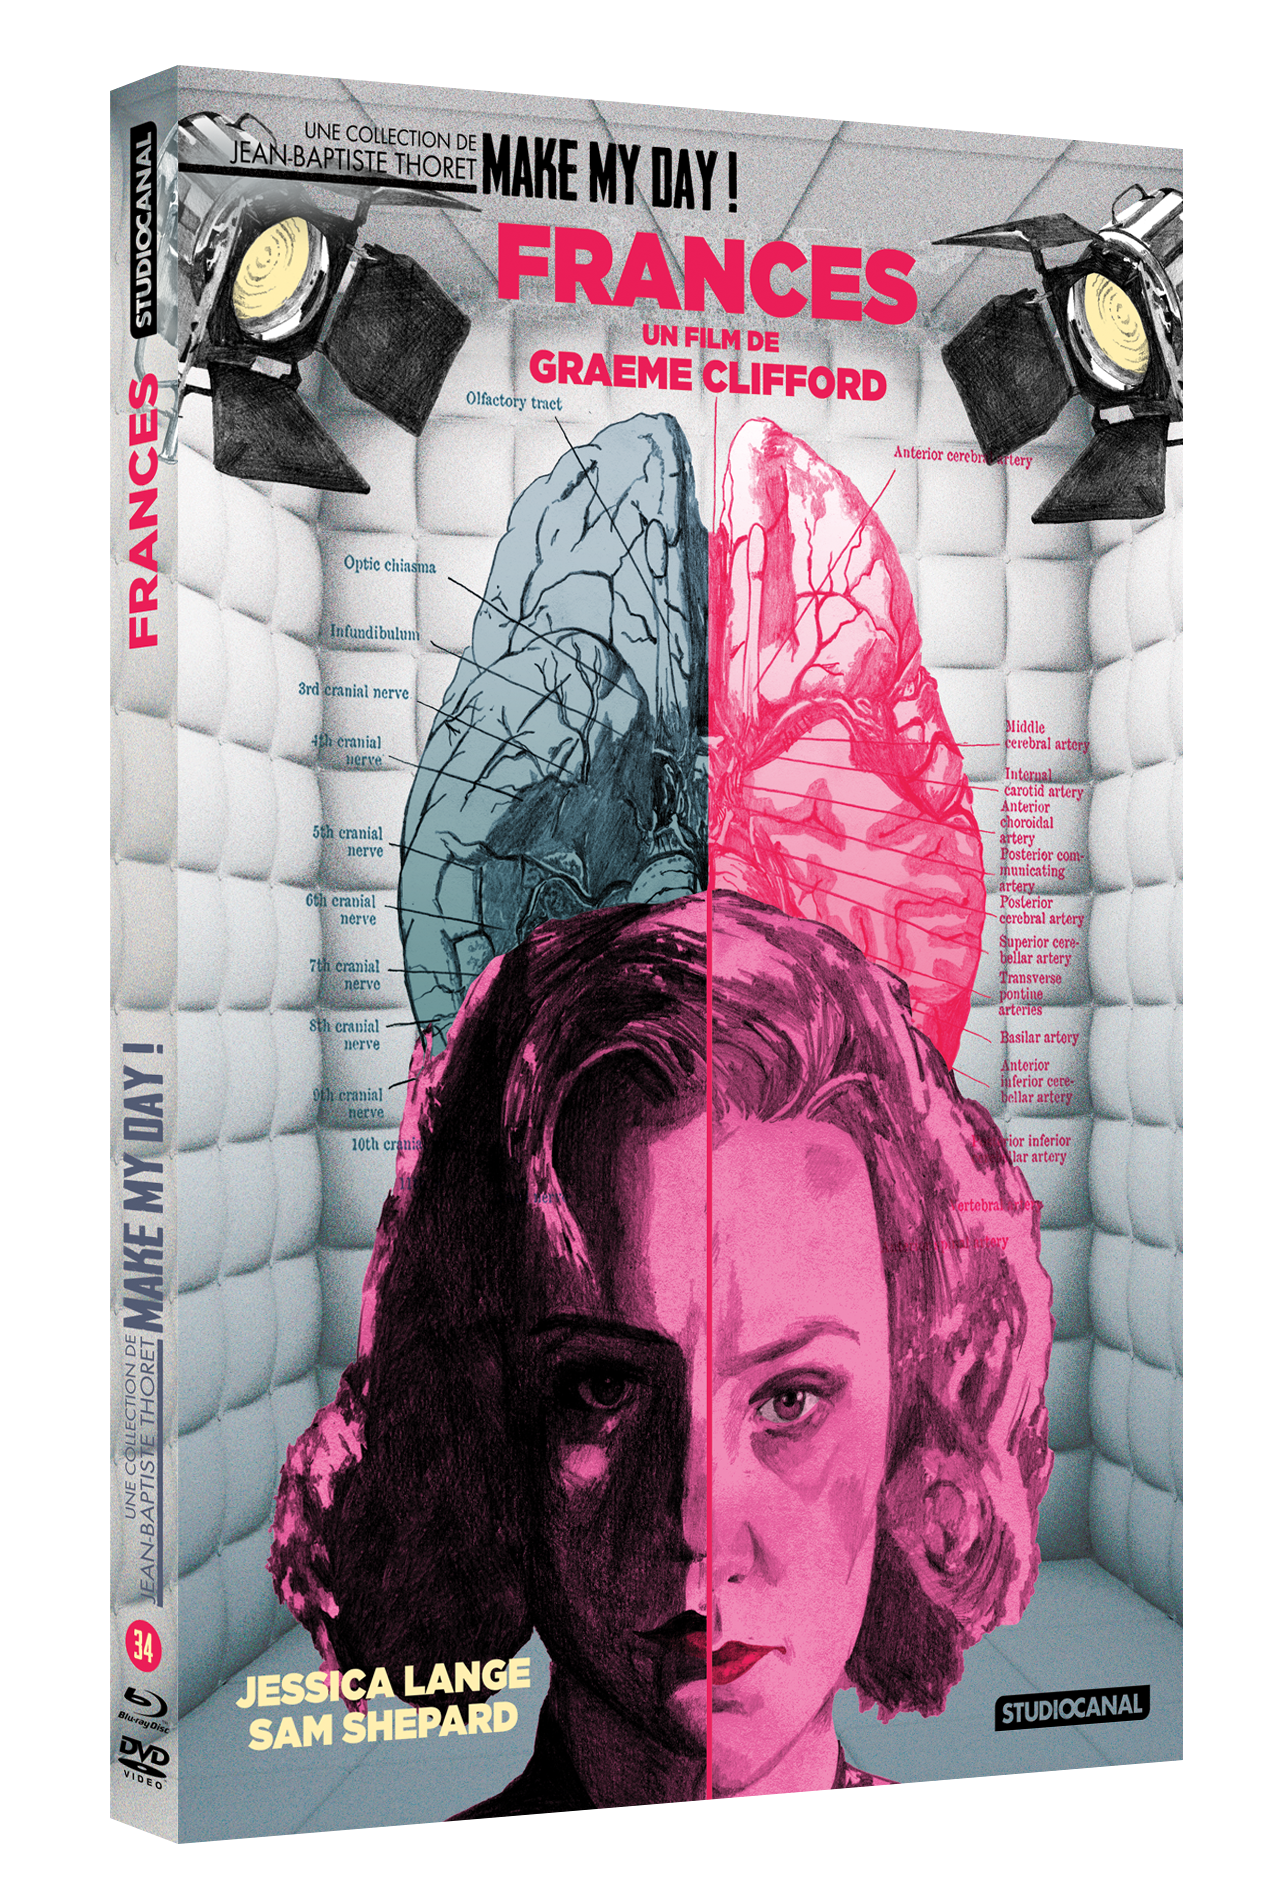 FRANCES (Concours) 4 Combo Blu-Ray DVD à gagner 5053083225292_frances_combo_def